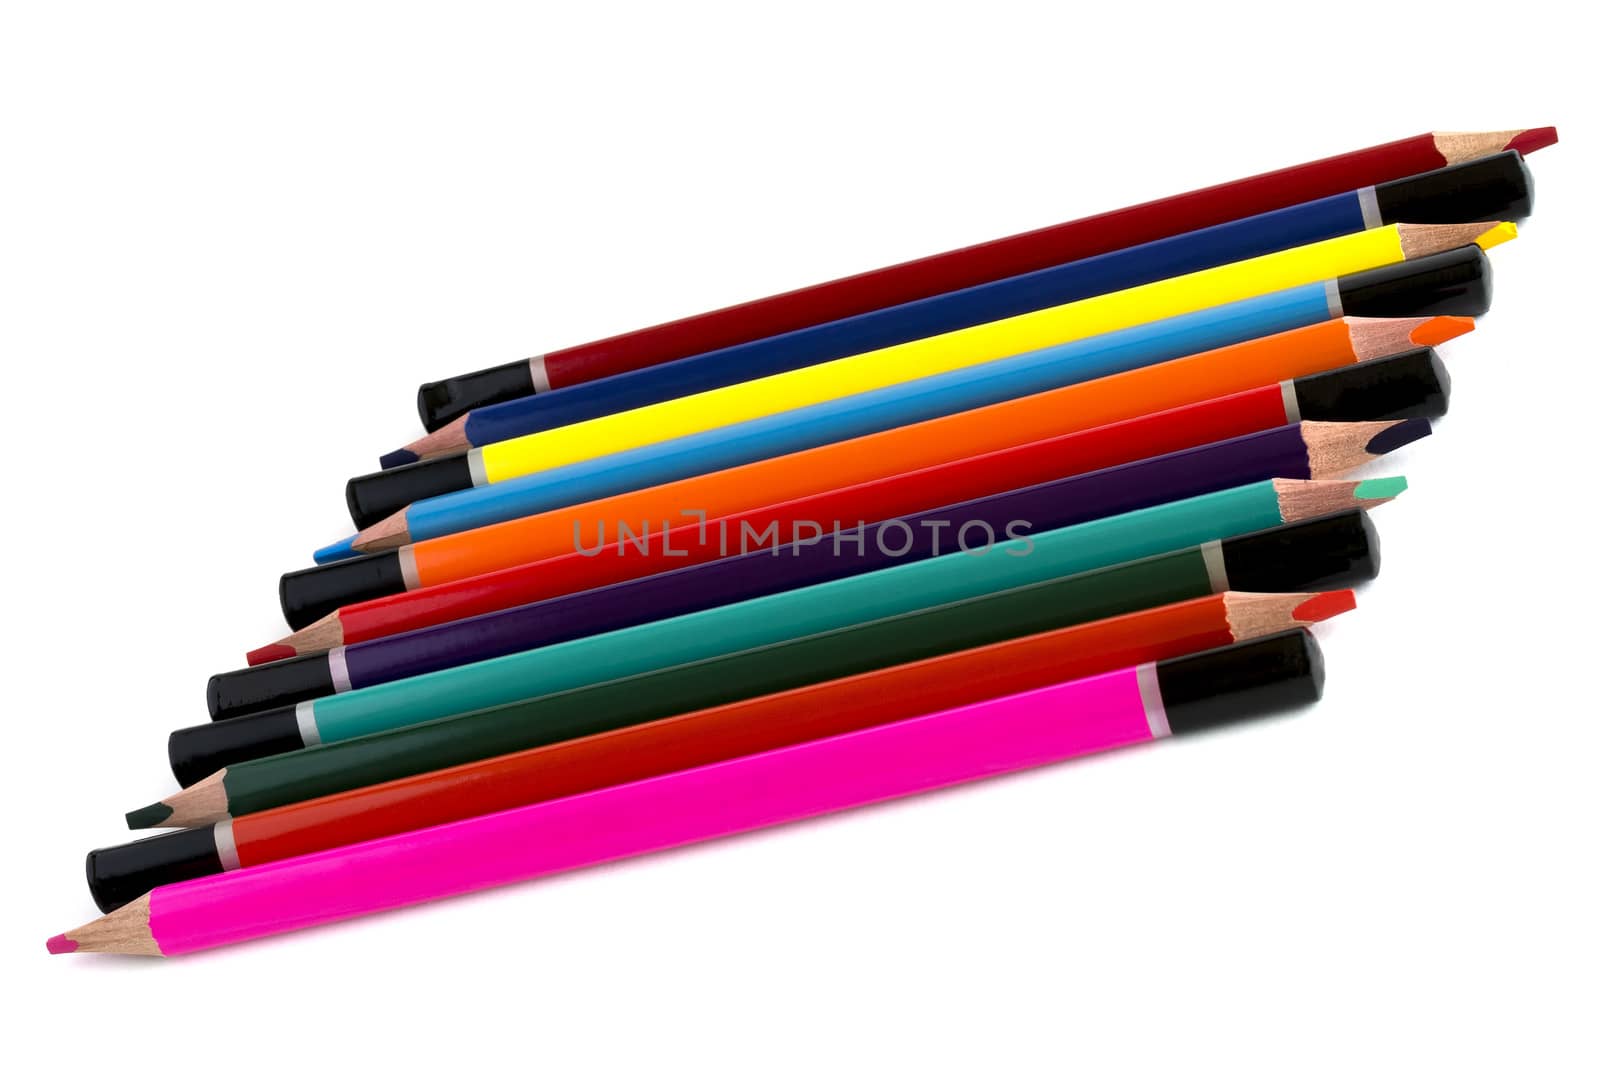 Baby colored pencils in a row, isolated on a white background